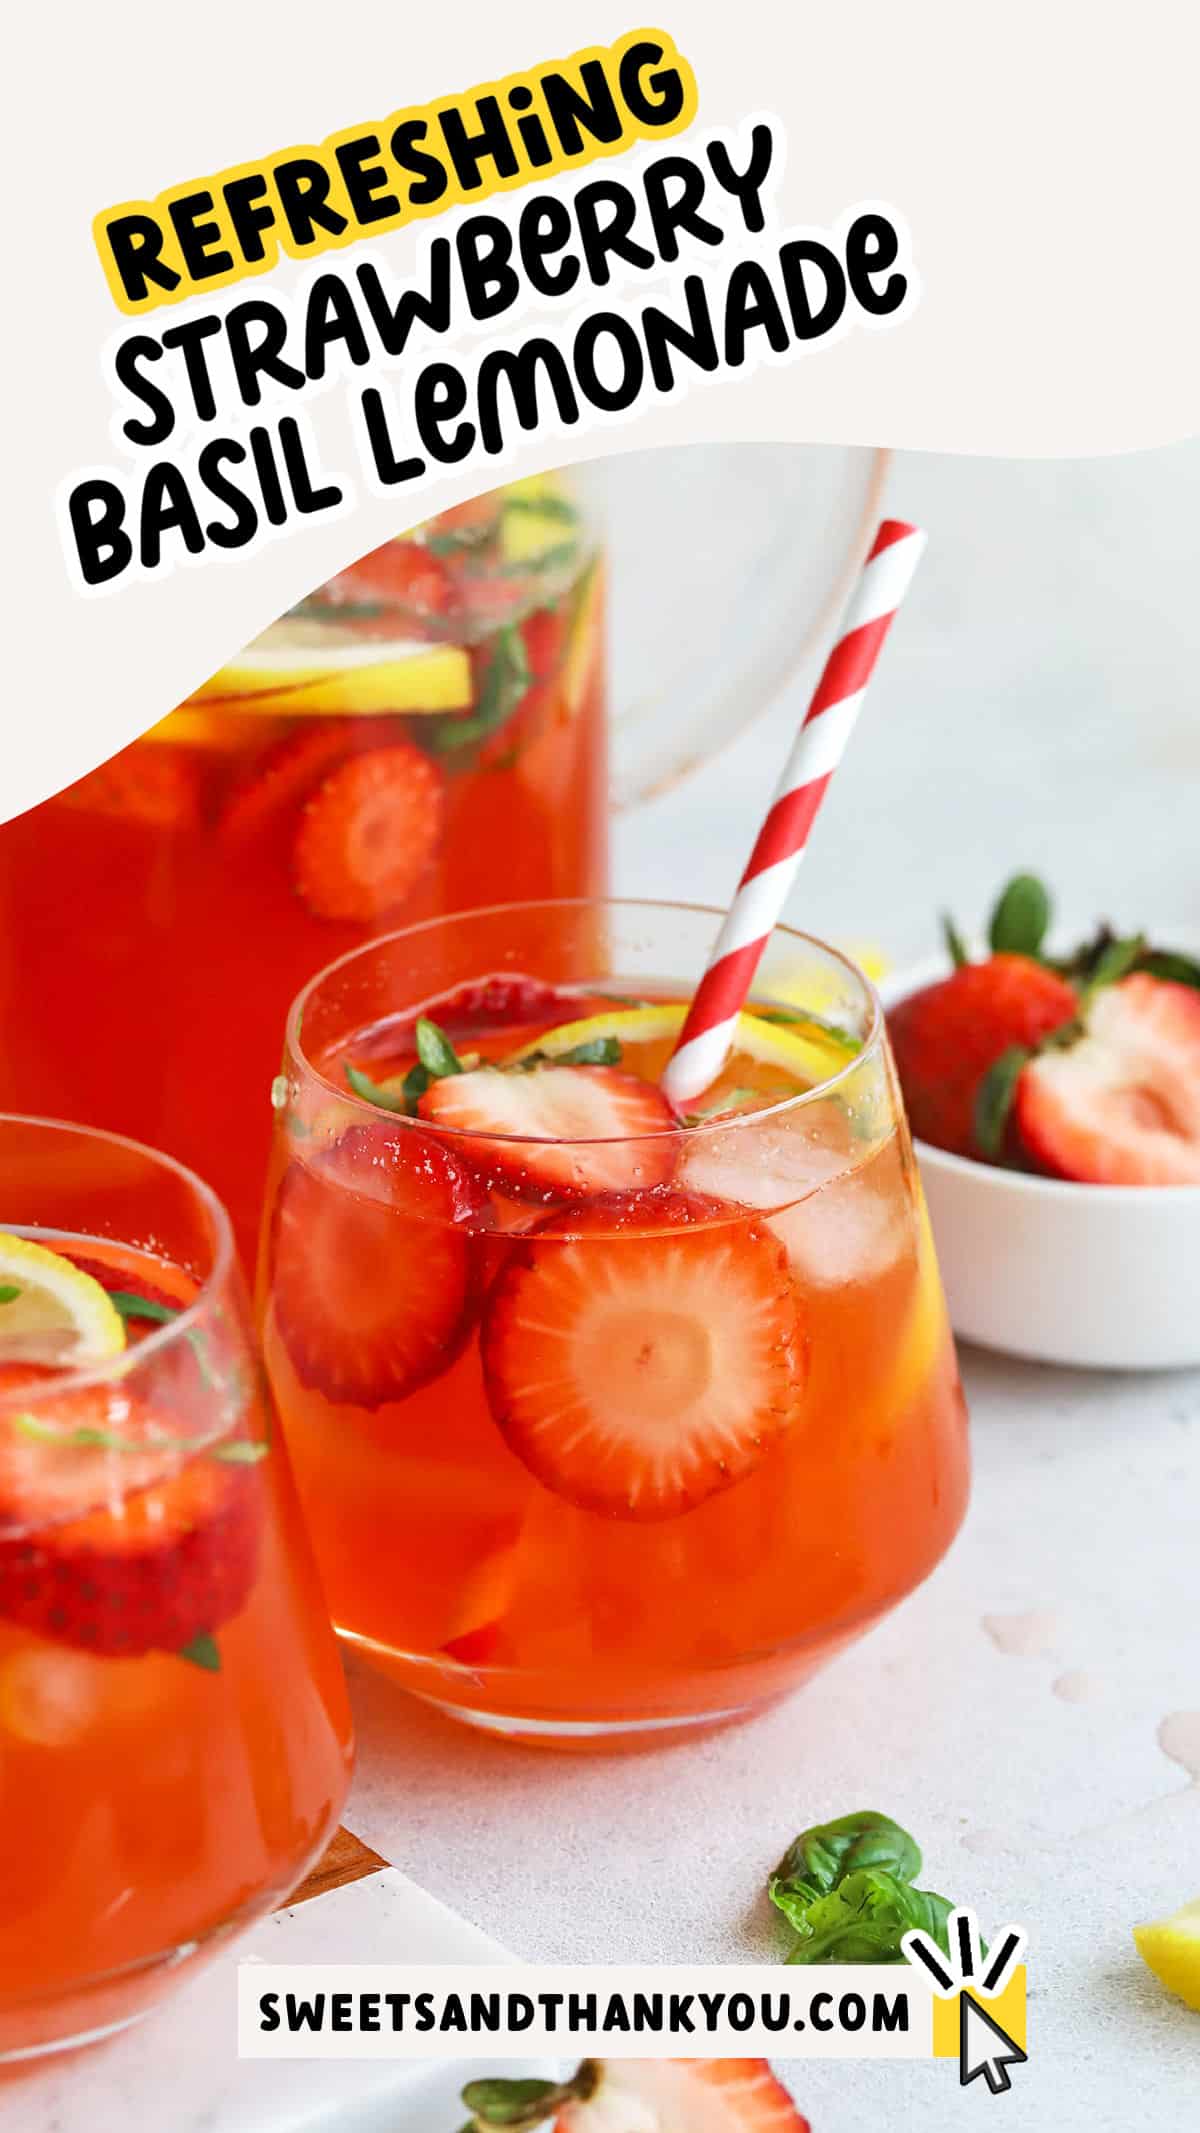 The perfect summer drink = Strawberry Basil Lemonade! This homemade strawberry lemonade recipe tastes incredible thanks to a few secret ingredients. It's better than restaurant lemonade--the perfect easy summer drink recipe. 